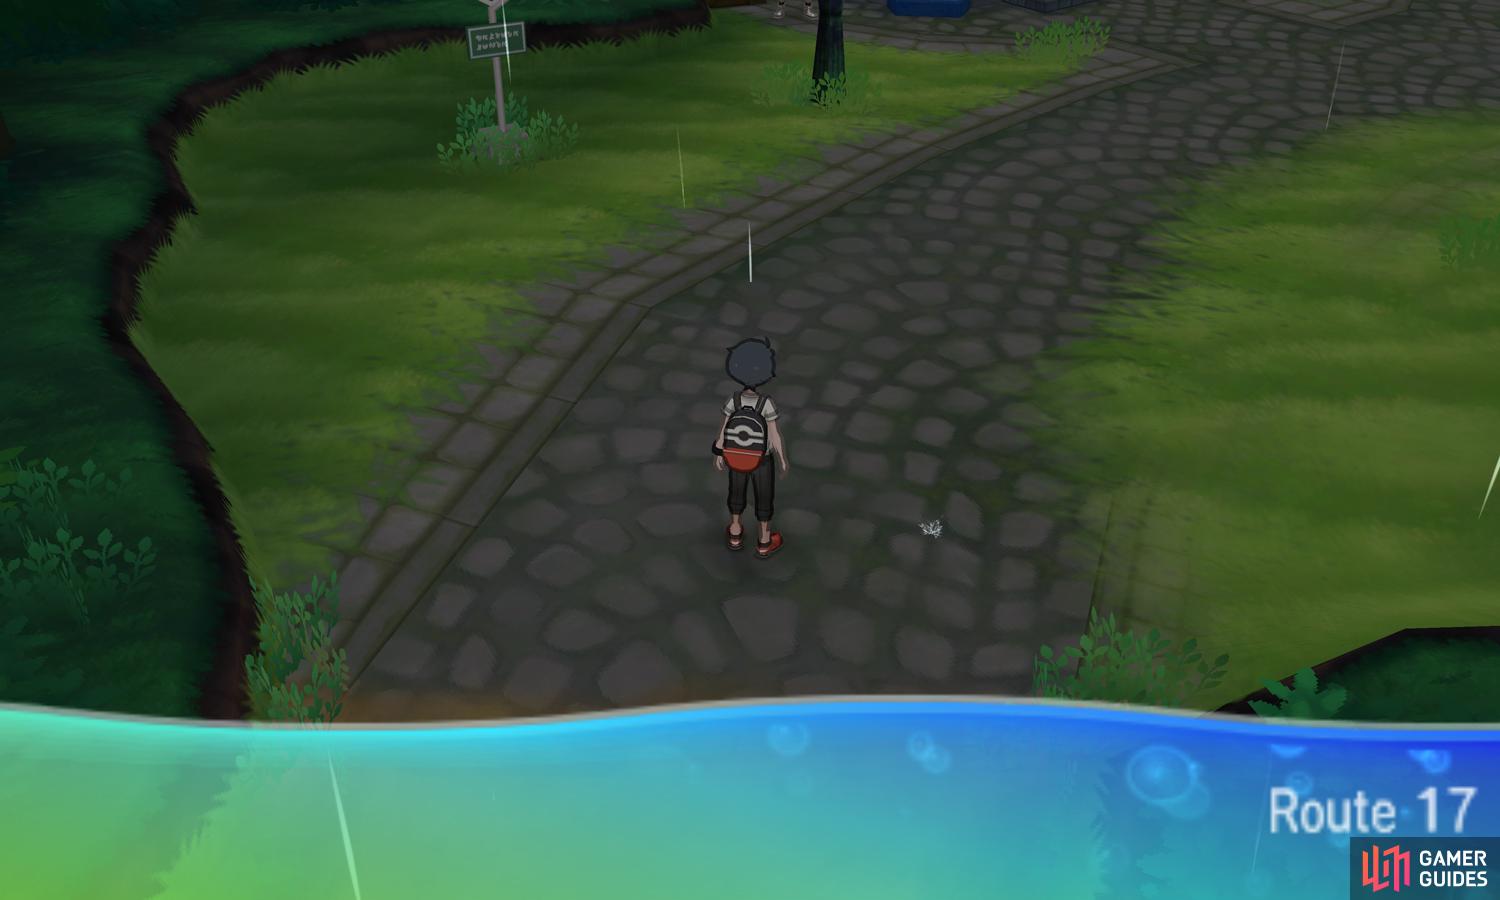 This area is patrolled by Team Skull, so be on your guard.